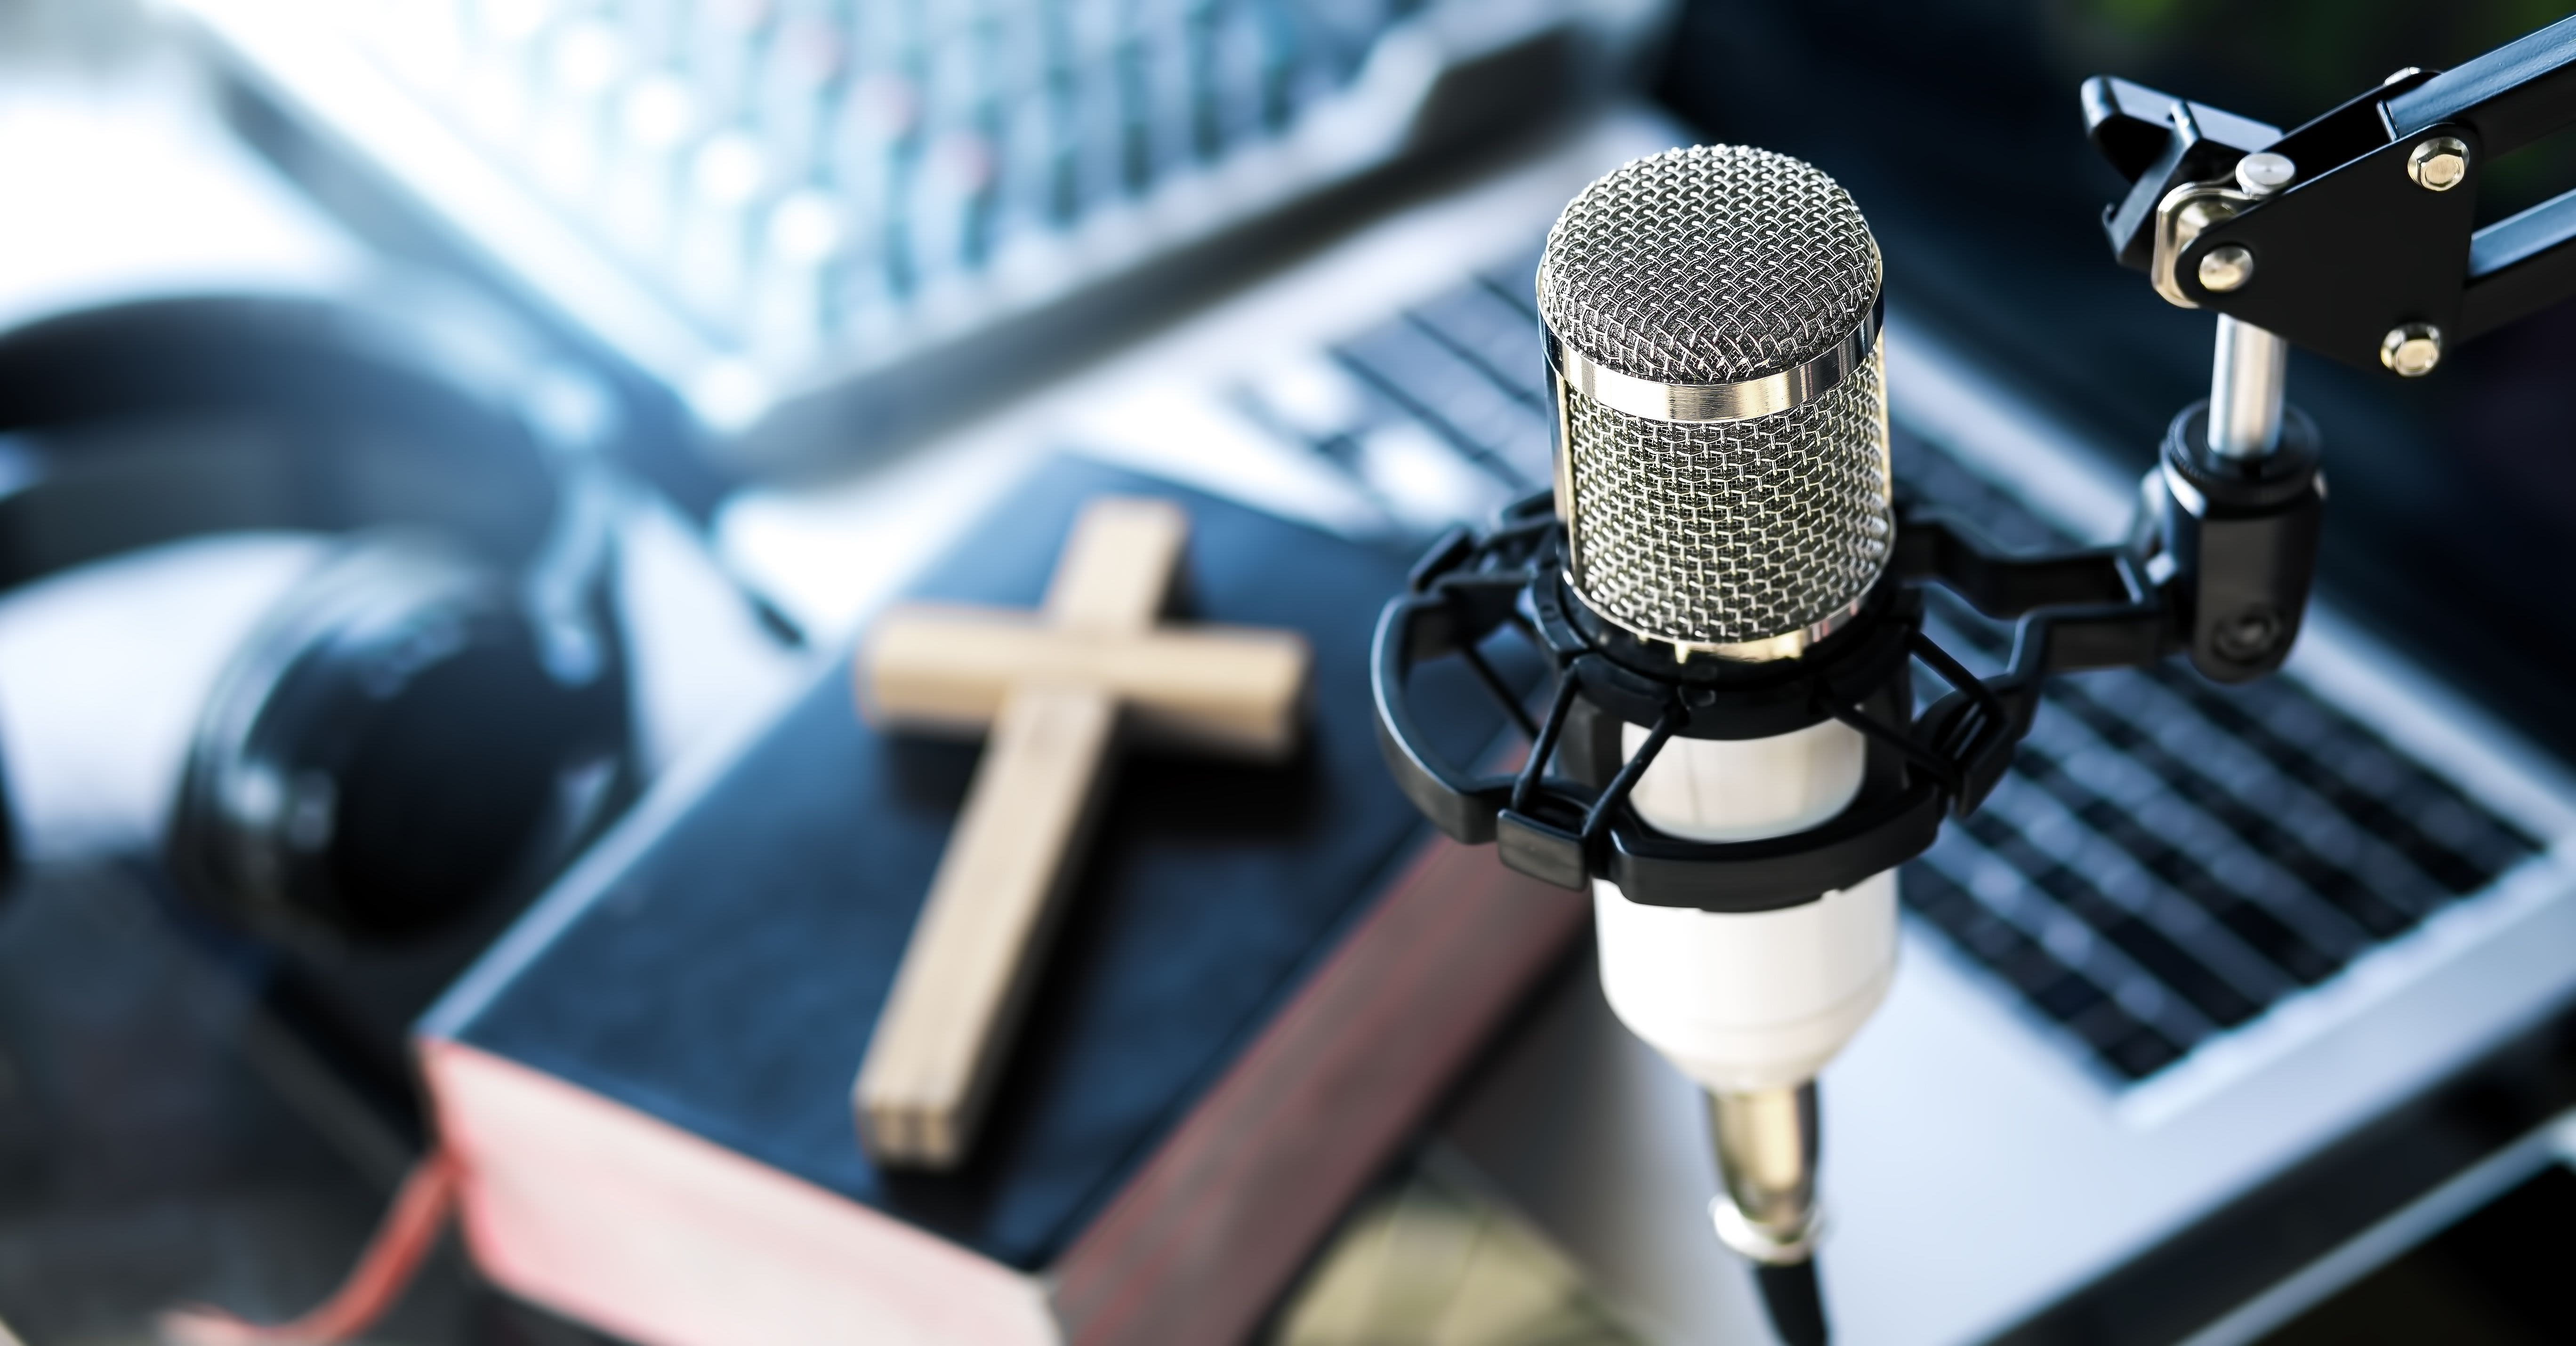 Catholic radio stations push back on new race, gender reporting rules